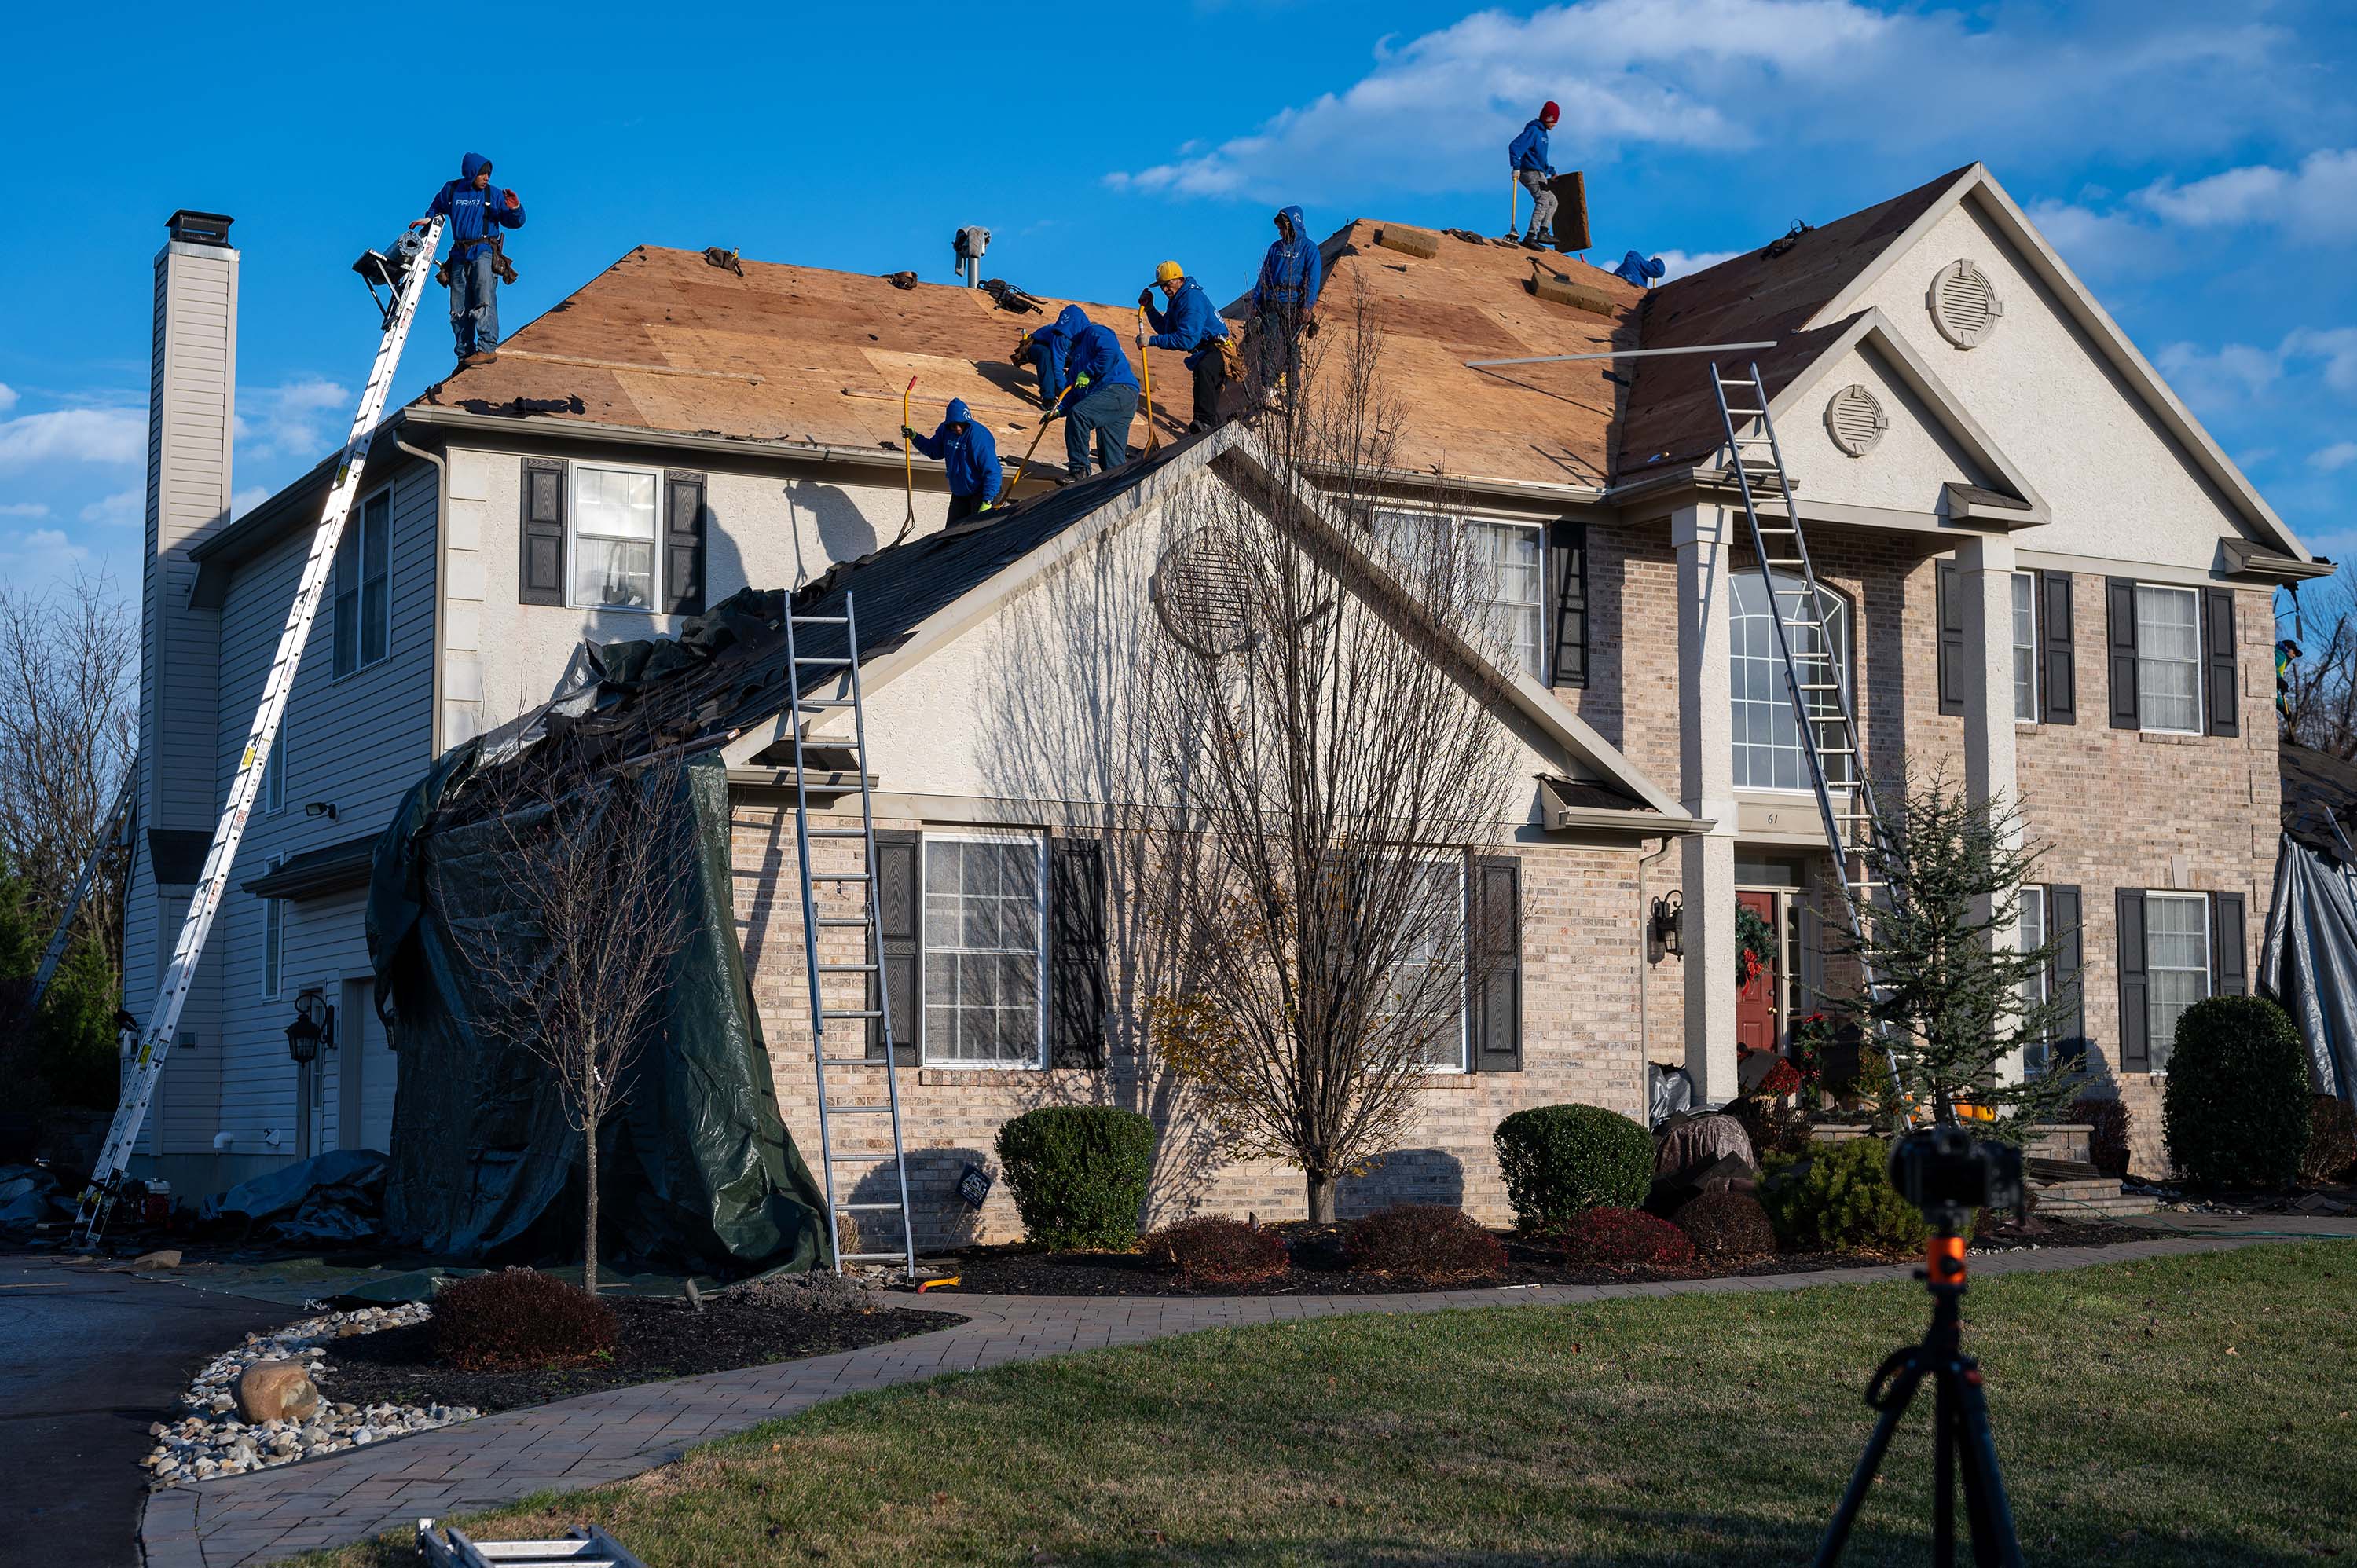 Roofing repair company - residential roofing contractors (large image)